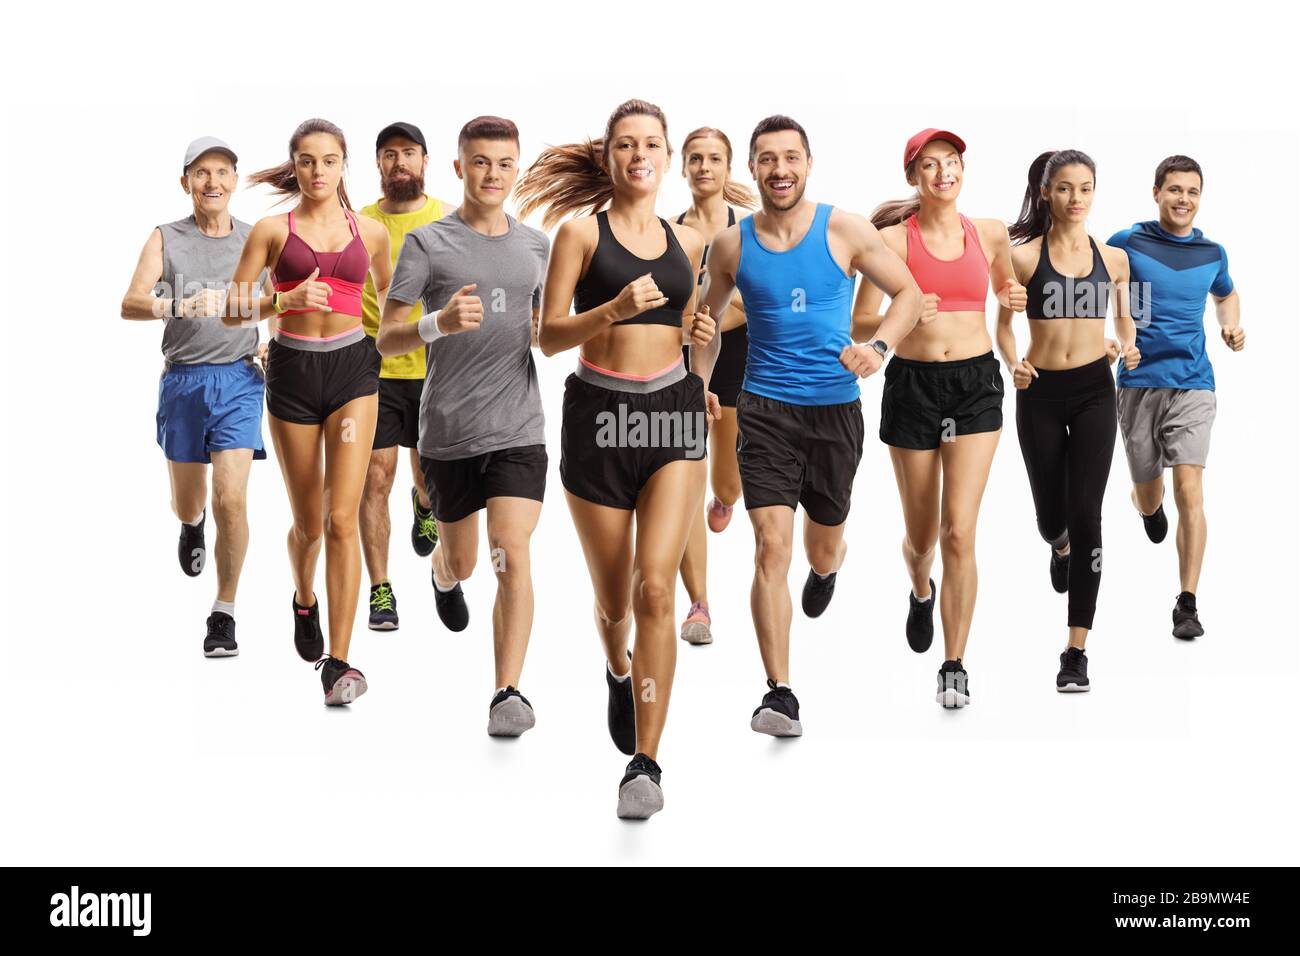 Full length portrait shot of many young and older people running in sportswear isolated on white background Stock Photo